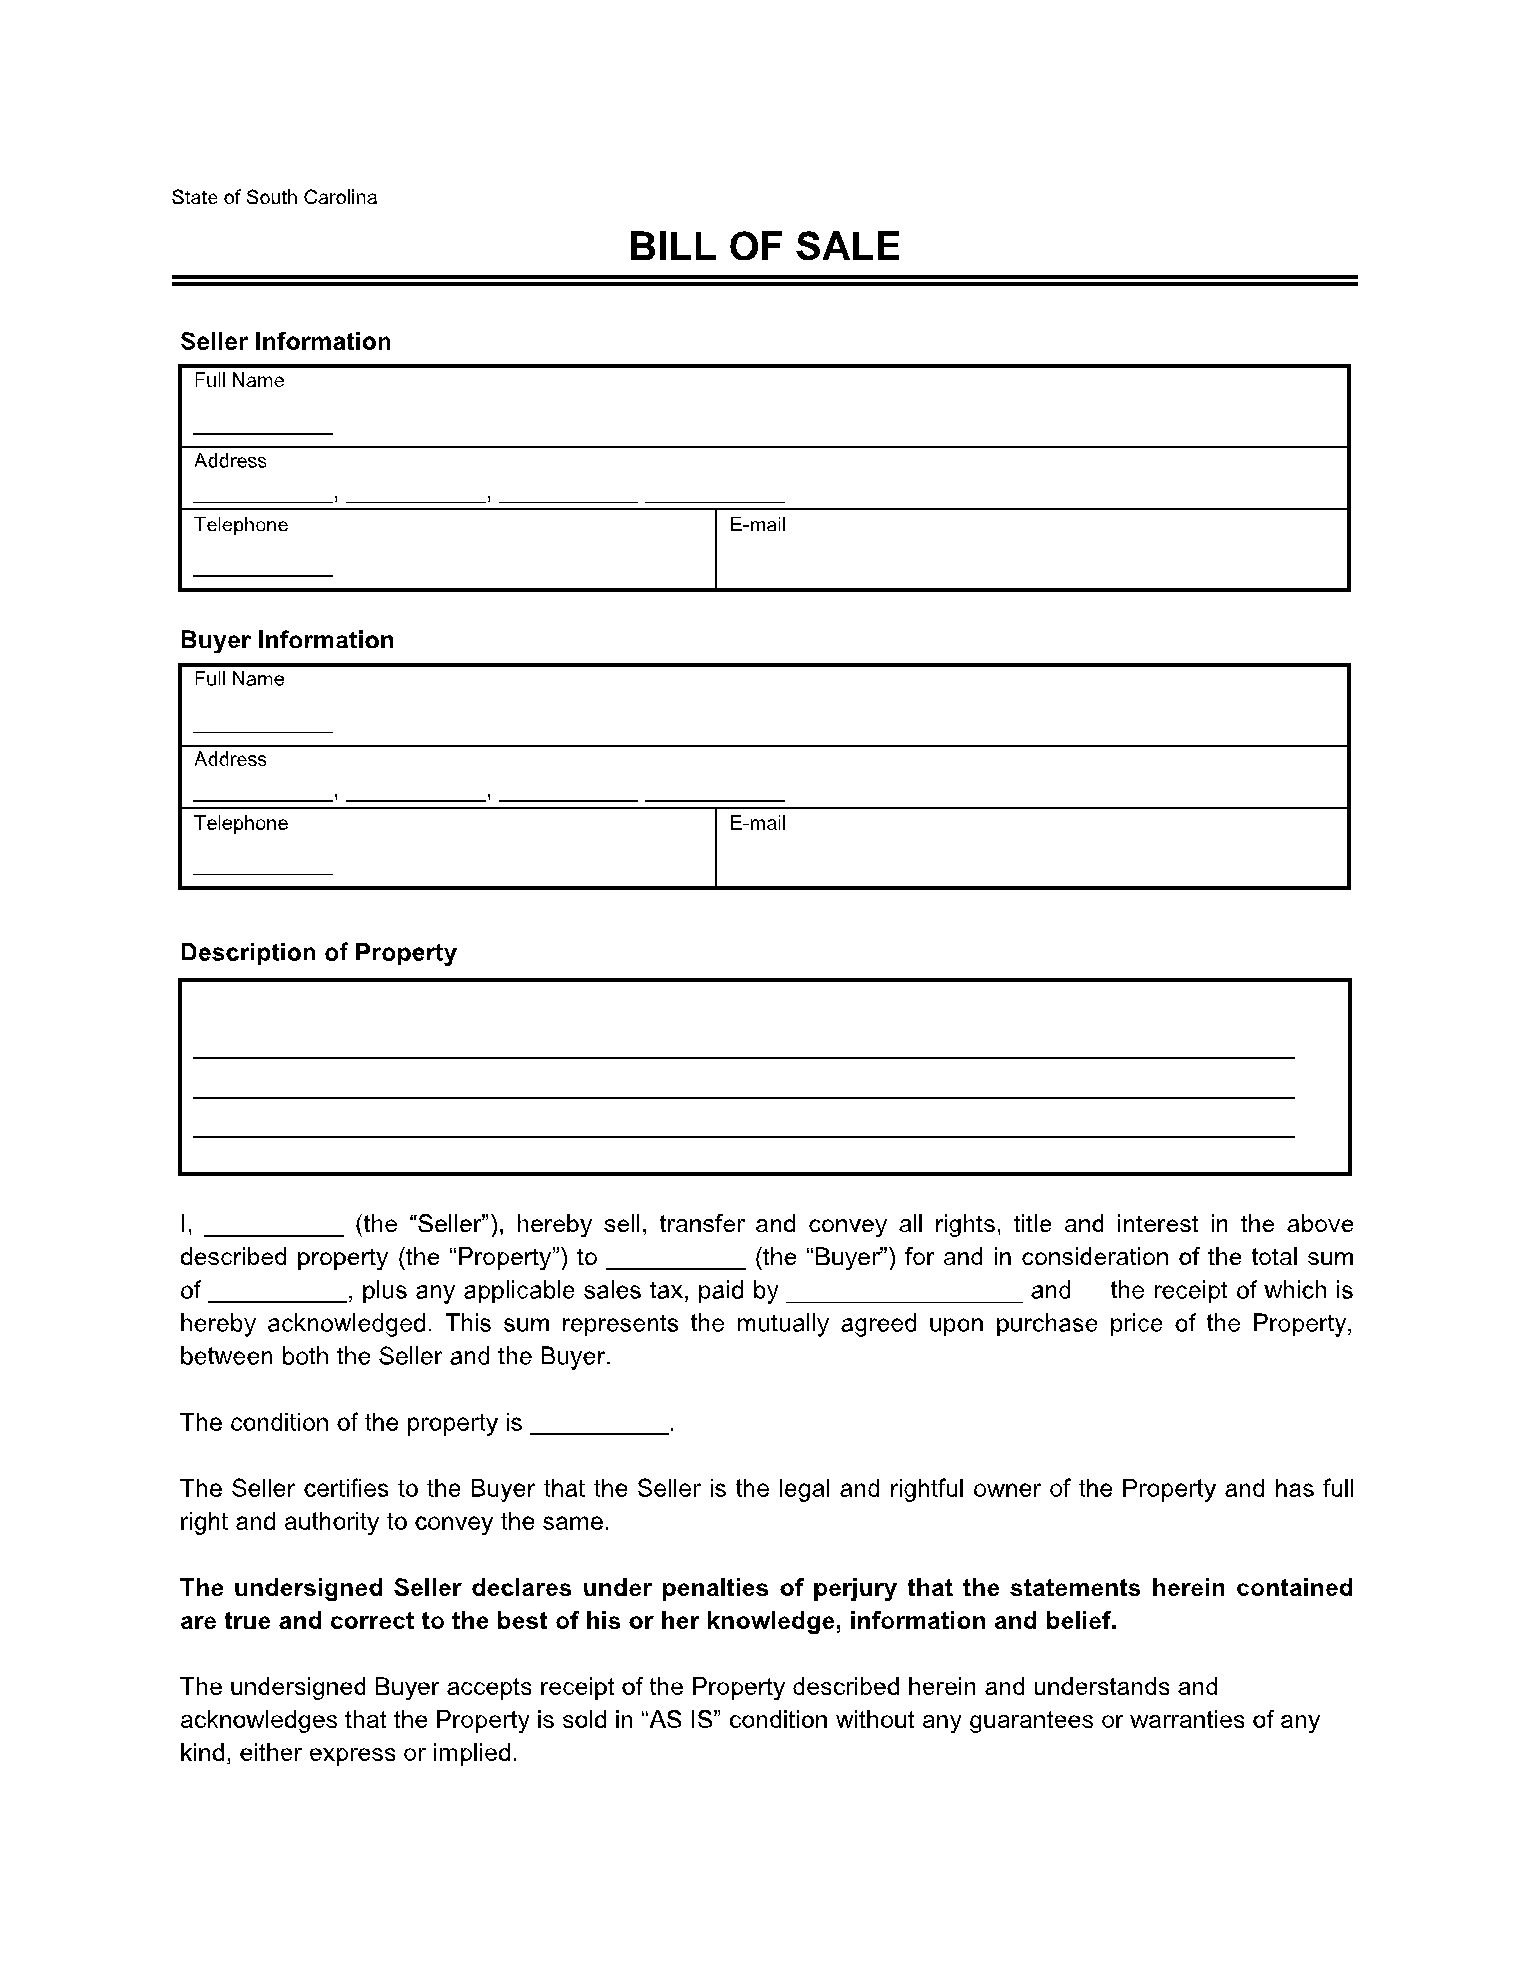 Bill of Sale Forms in South Carolina